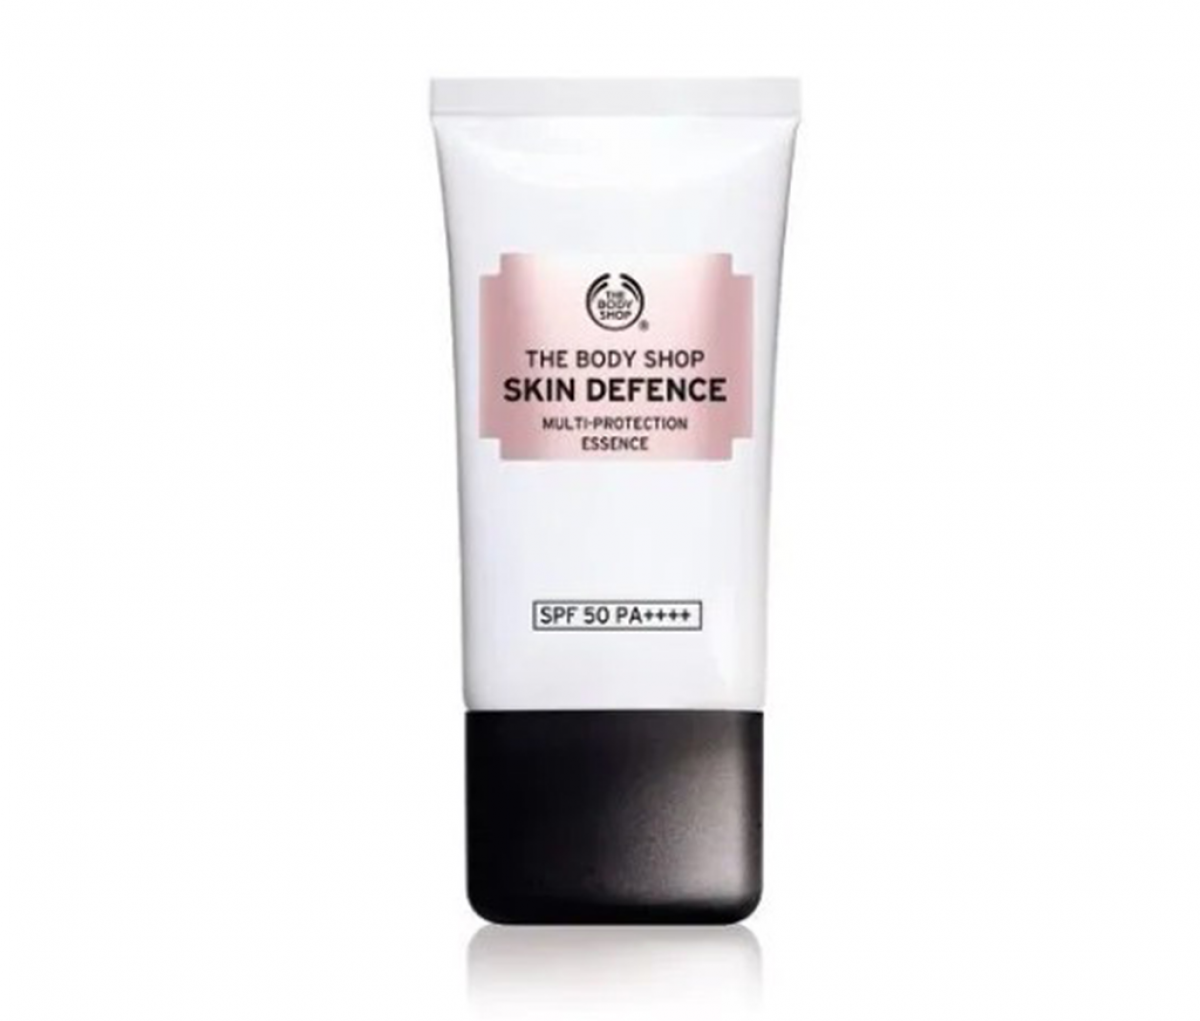 The Body Shop Multi- Protection Essence Skin Defence SPF50 